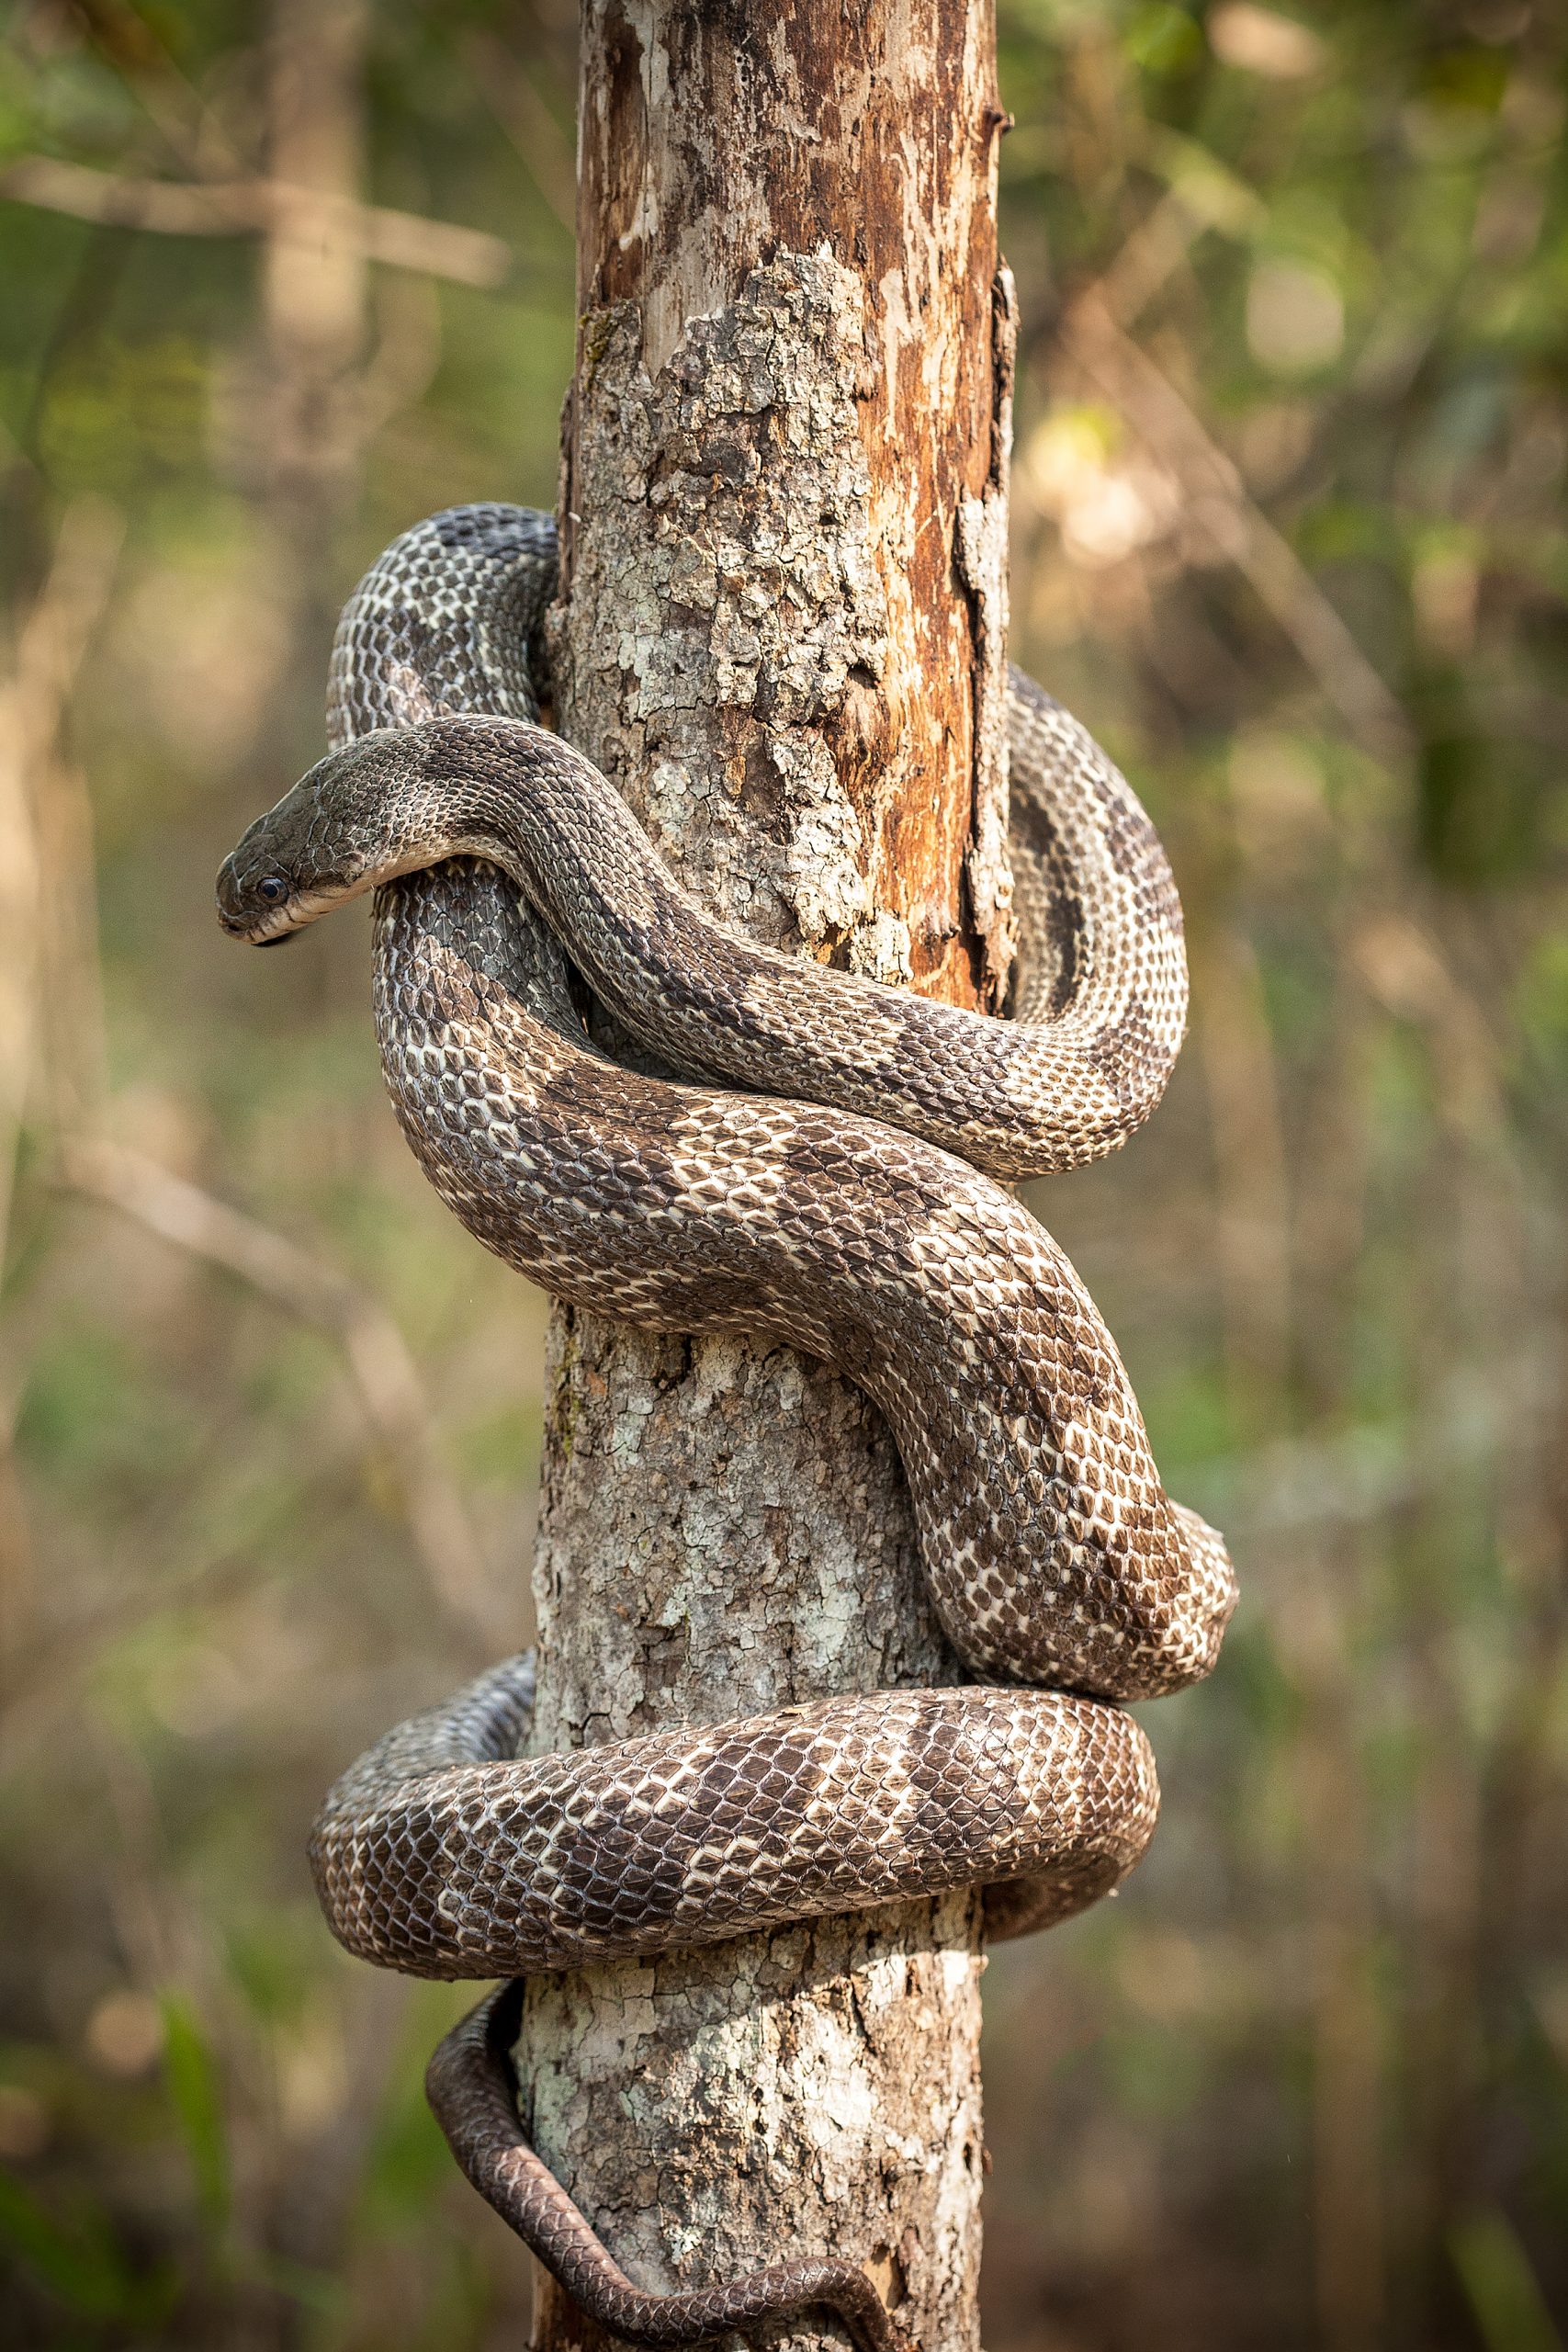 The gray rat snake is a constrictor that frequents trees searching for eggs or squirrels.  If threatened it will vibrate the tip of its tail similar to a rattlesnake but without the rattles or the venom. 